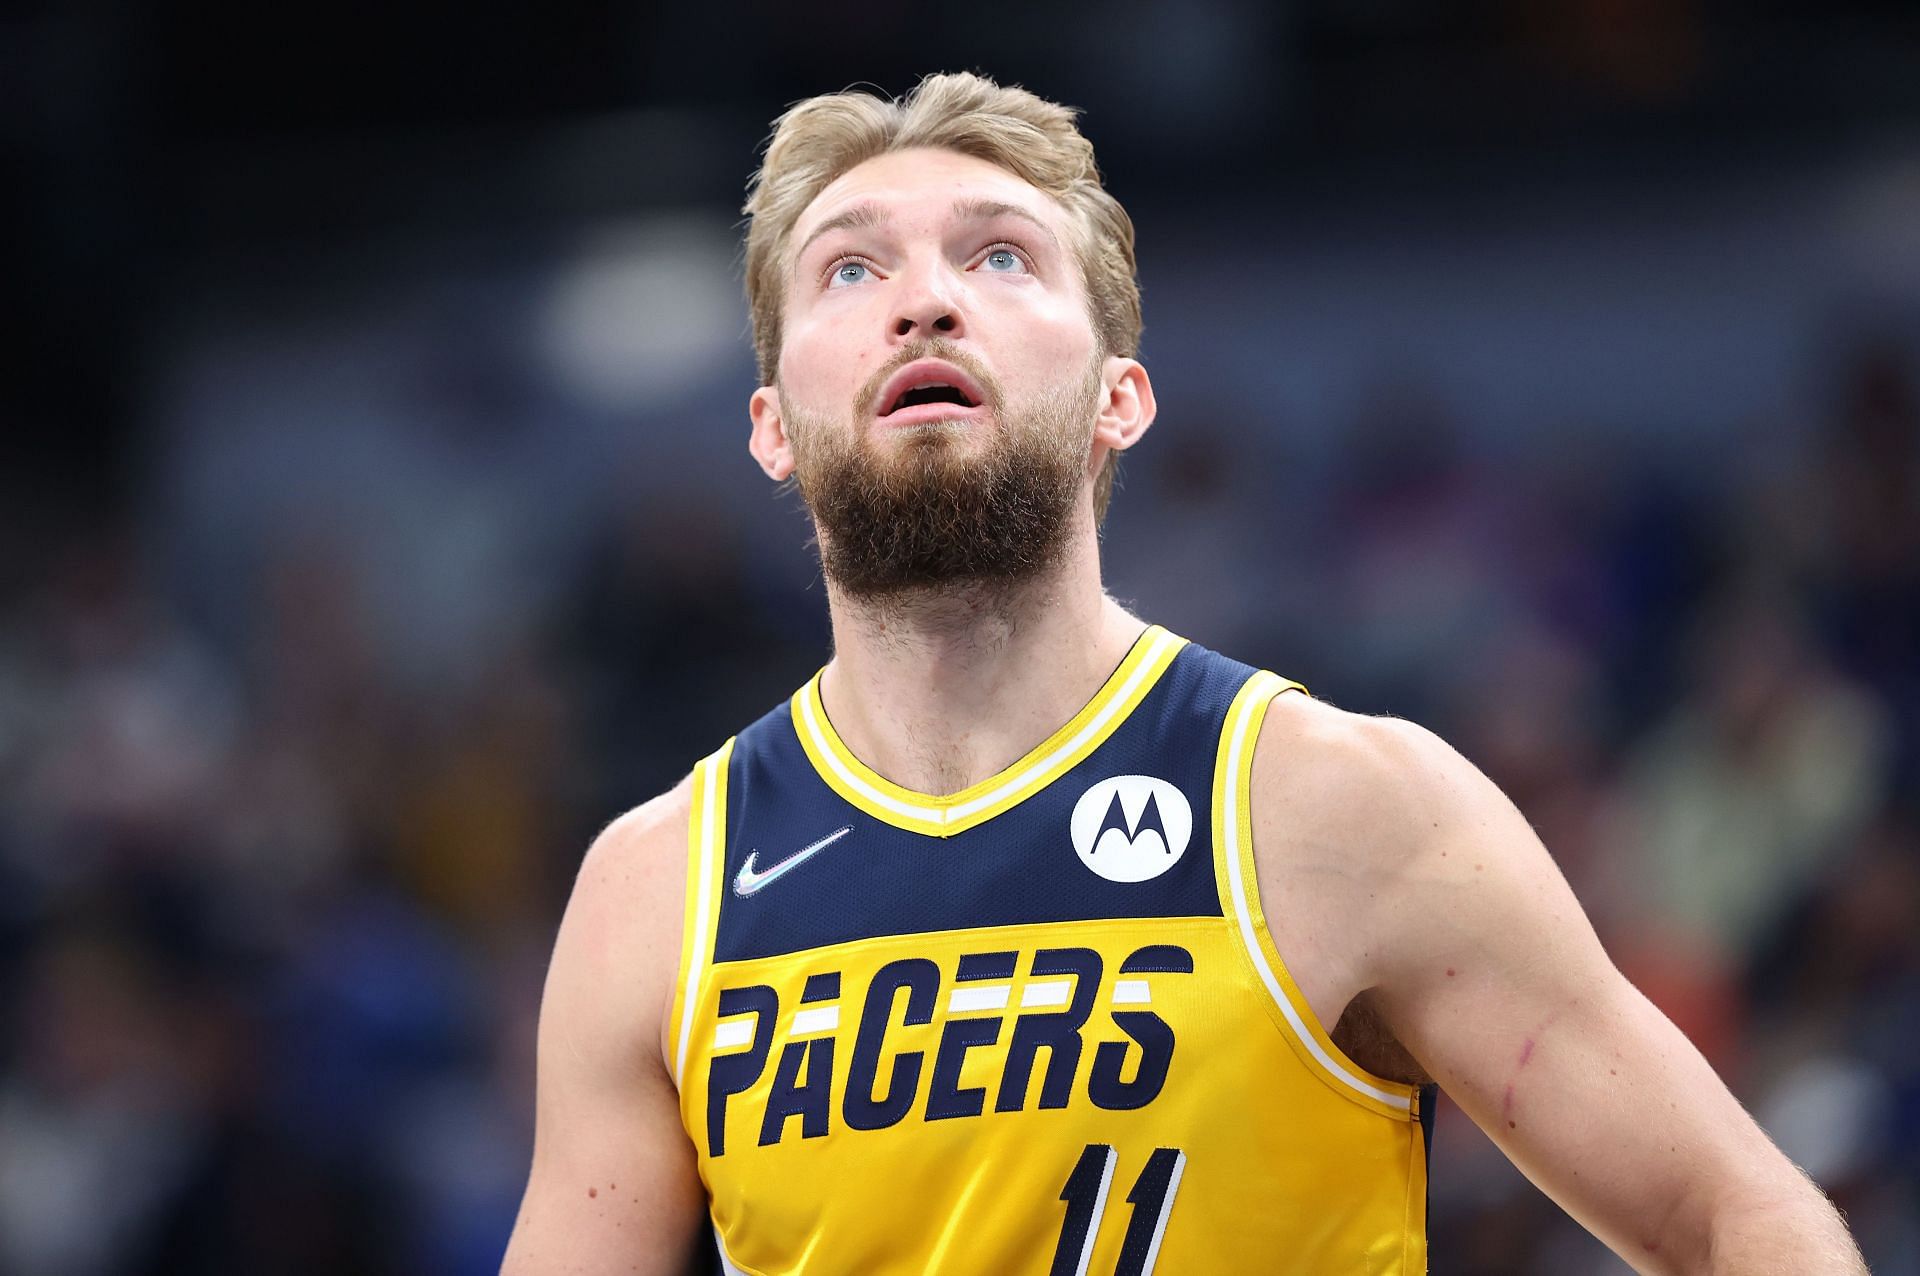 Domantas Sabonis of the Indiana Pacers.